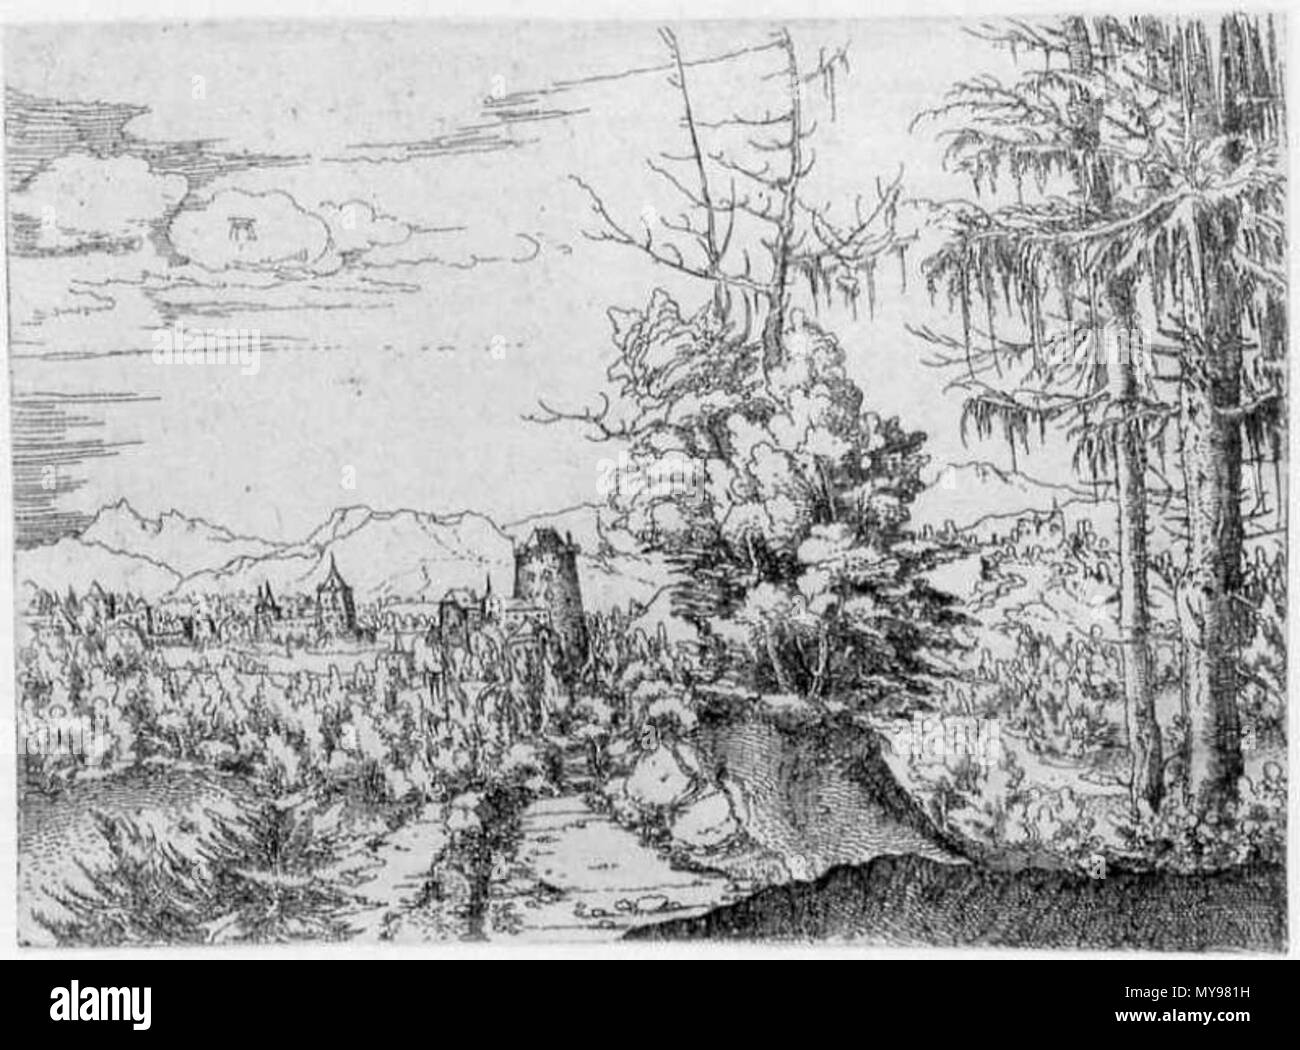 . English: Albrecht Altdorfer - Landscape with Two Spruces . 1522.   Albrecht Altdorfer  (1480–1538)     Description German painter, draughtsman, engraver and architect  Date of birth/death circa 1480 12 February 1538  Location of birth/death Altdorf or Regensburg Regensburg  Work location Regensburg  Authority control  : Q153746 VIAF: 100221829 ISNI: 0000 0001 2145 2119 ULAN: 500031250 LCCN: n50053721 NLA: 35003981 WorldCat 28 Albrecht Altdorfer - Landscape with Two Spruces Stock Photo